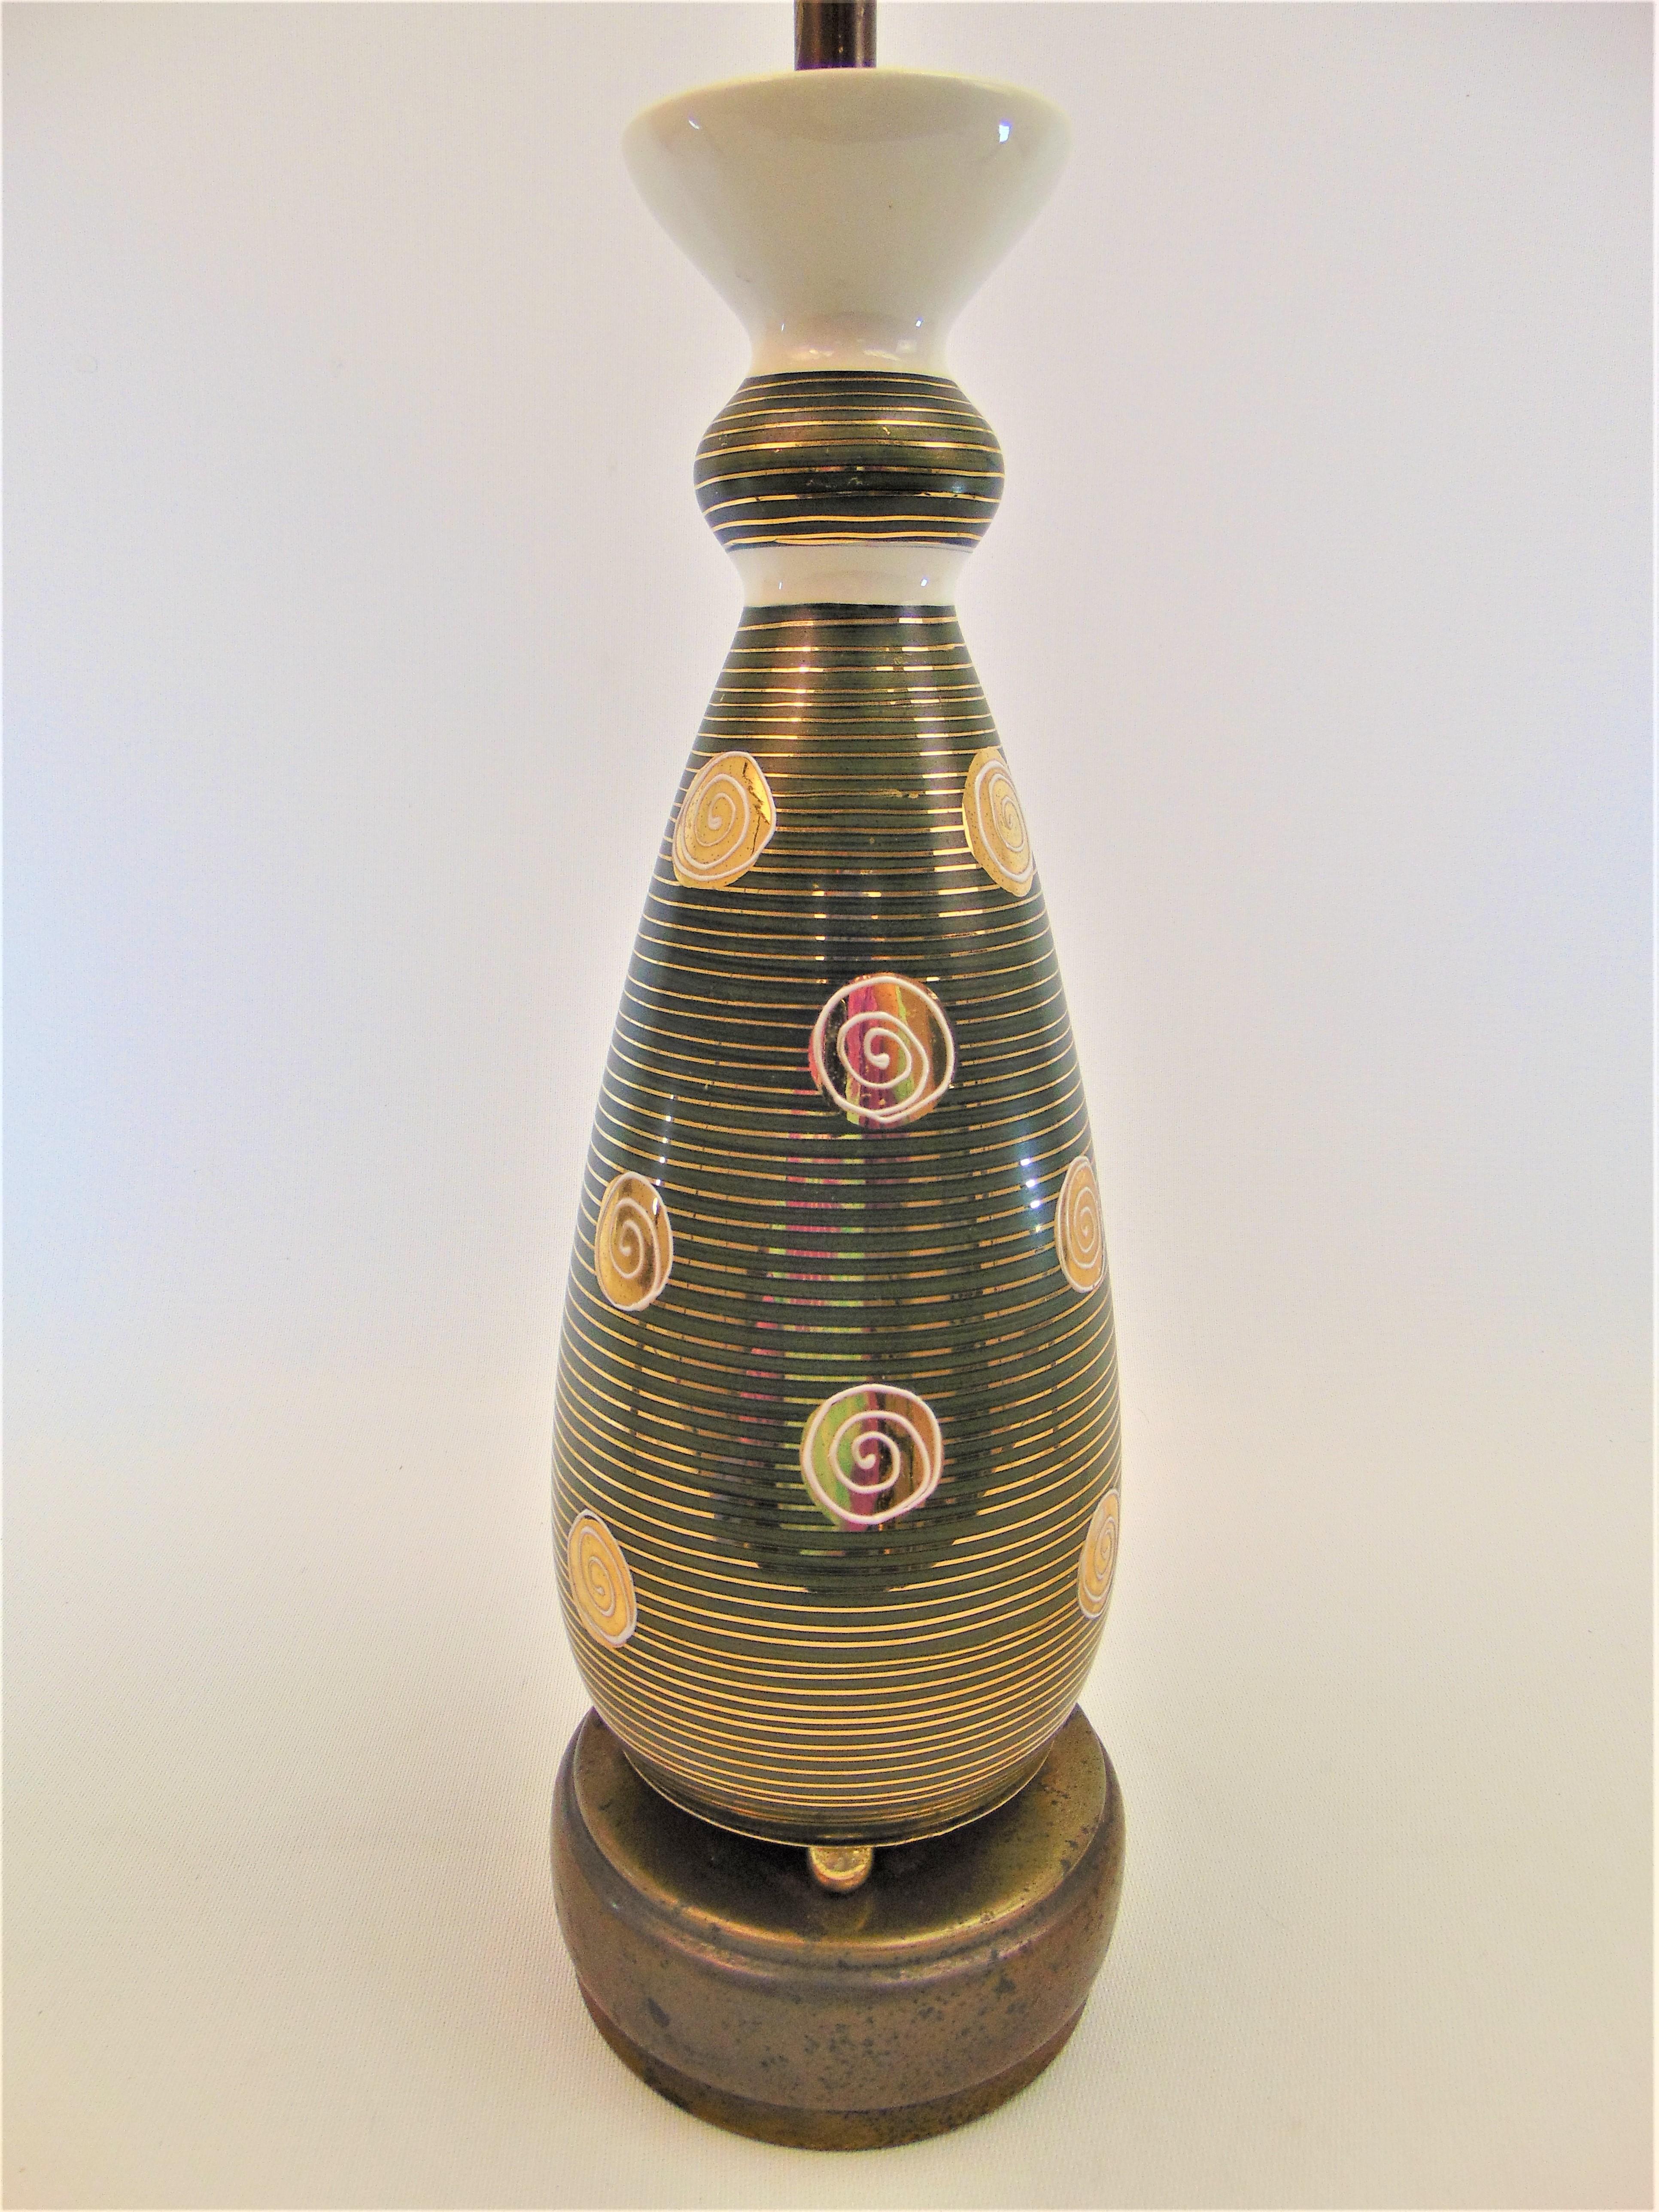 Modern Ceramic and Brass Hand Painted Table Lamp, circa 1960s For Sale 2